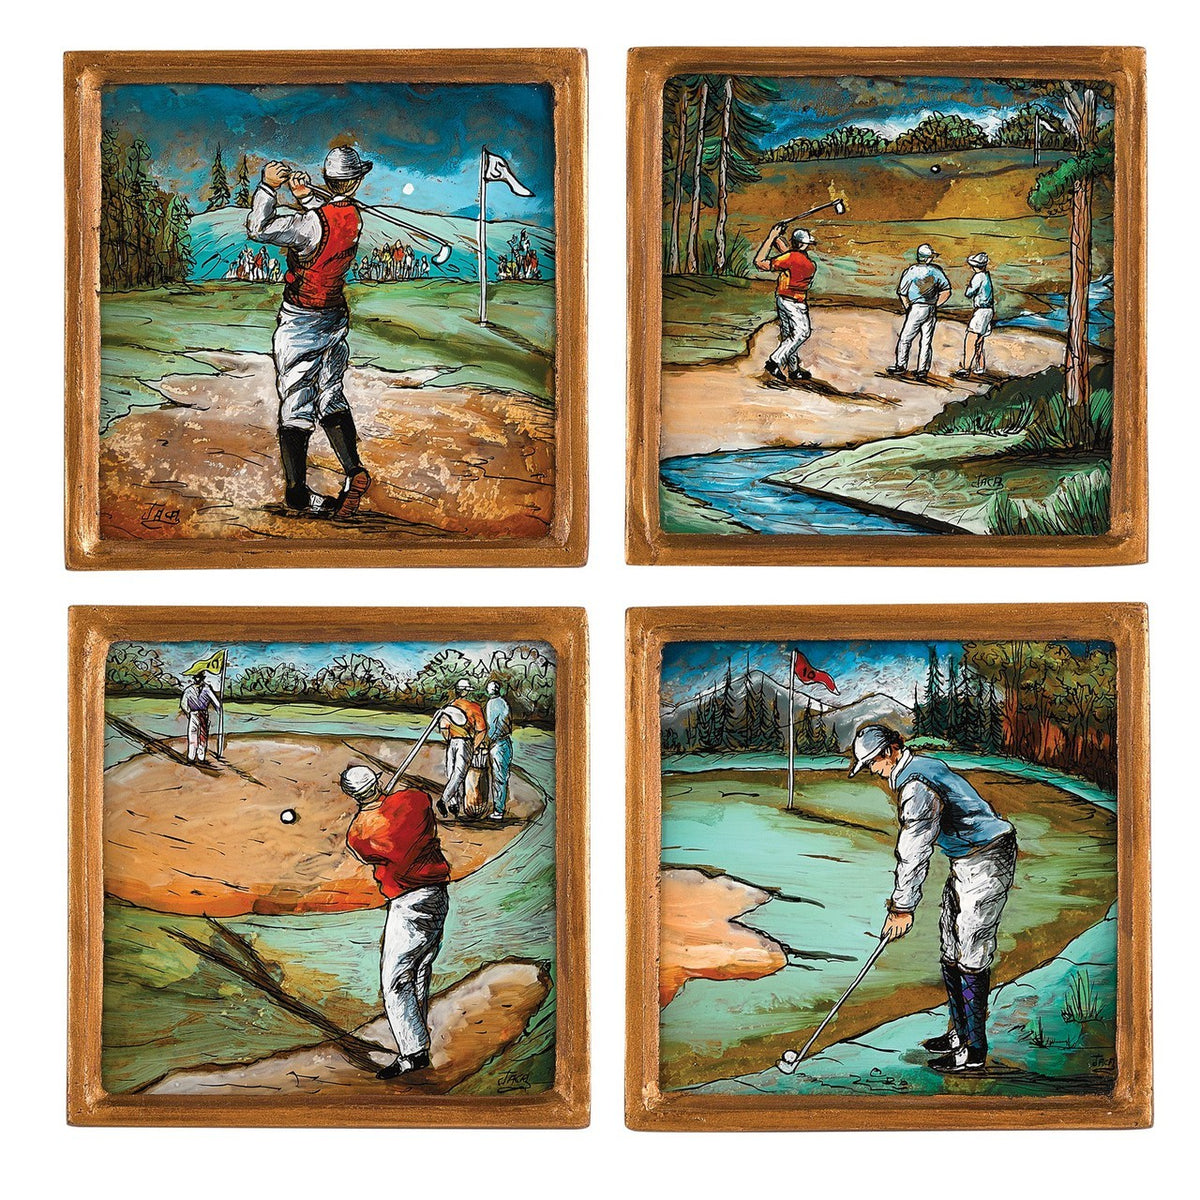 Golf Assorted 4 Pc Coaster Set 4 inches Square